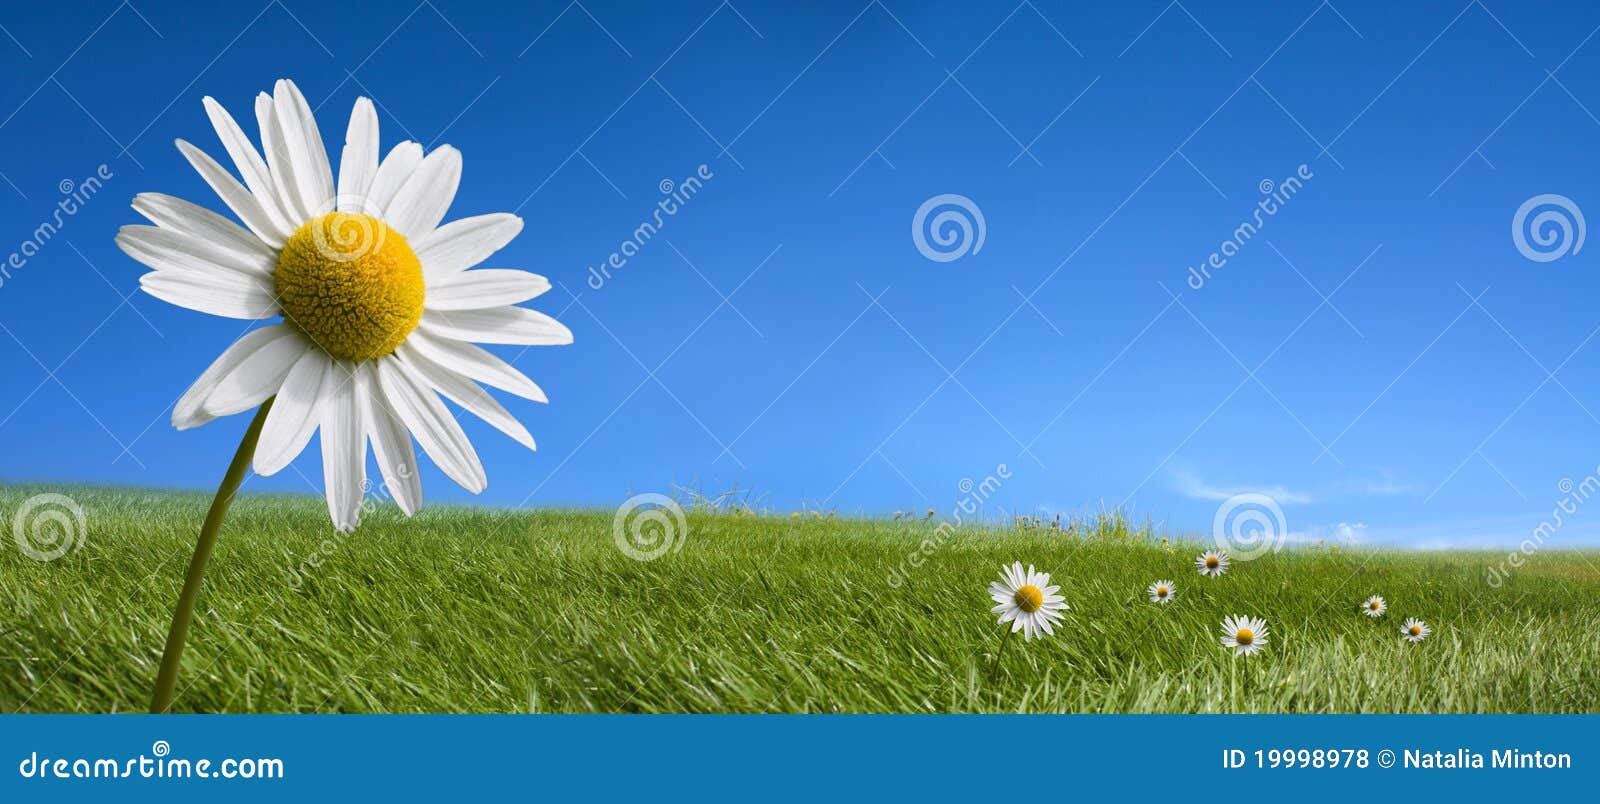 picturesque summer landscape and daisy flowers